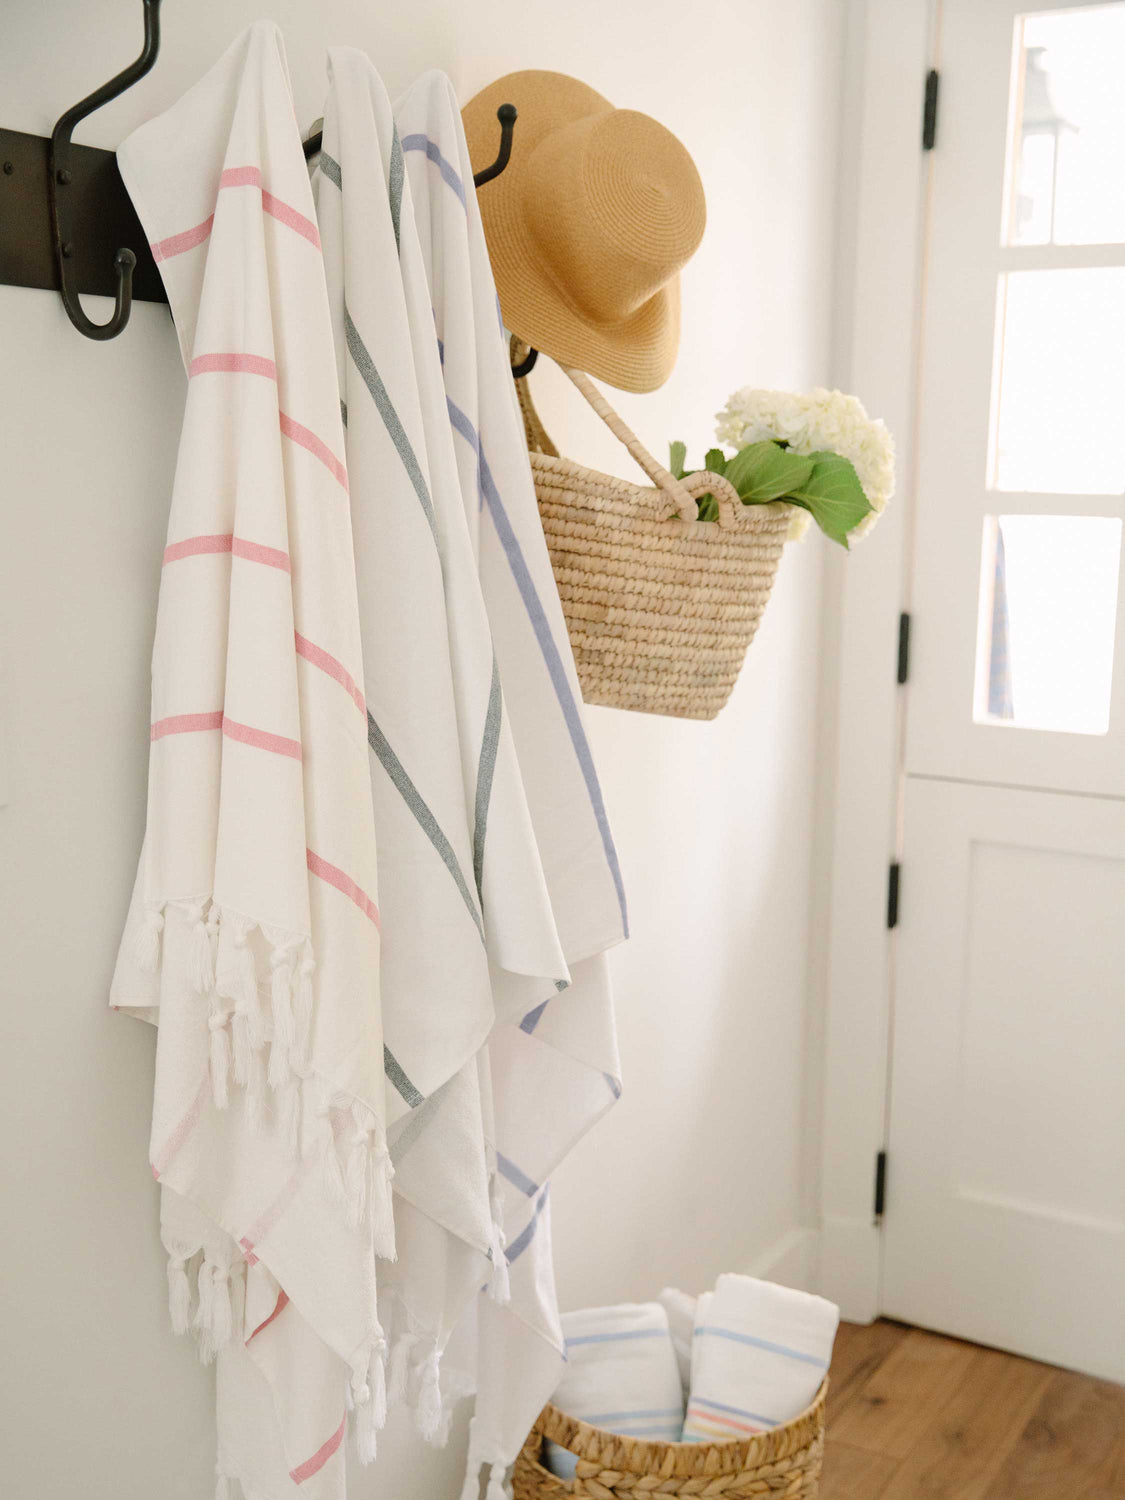 Three extra large striped Turkish towels—pink, charcoal, and navy—hanging side by side.